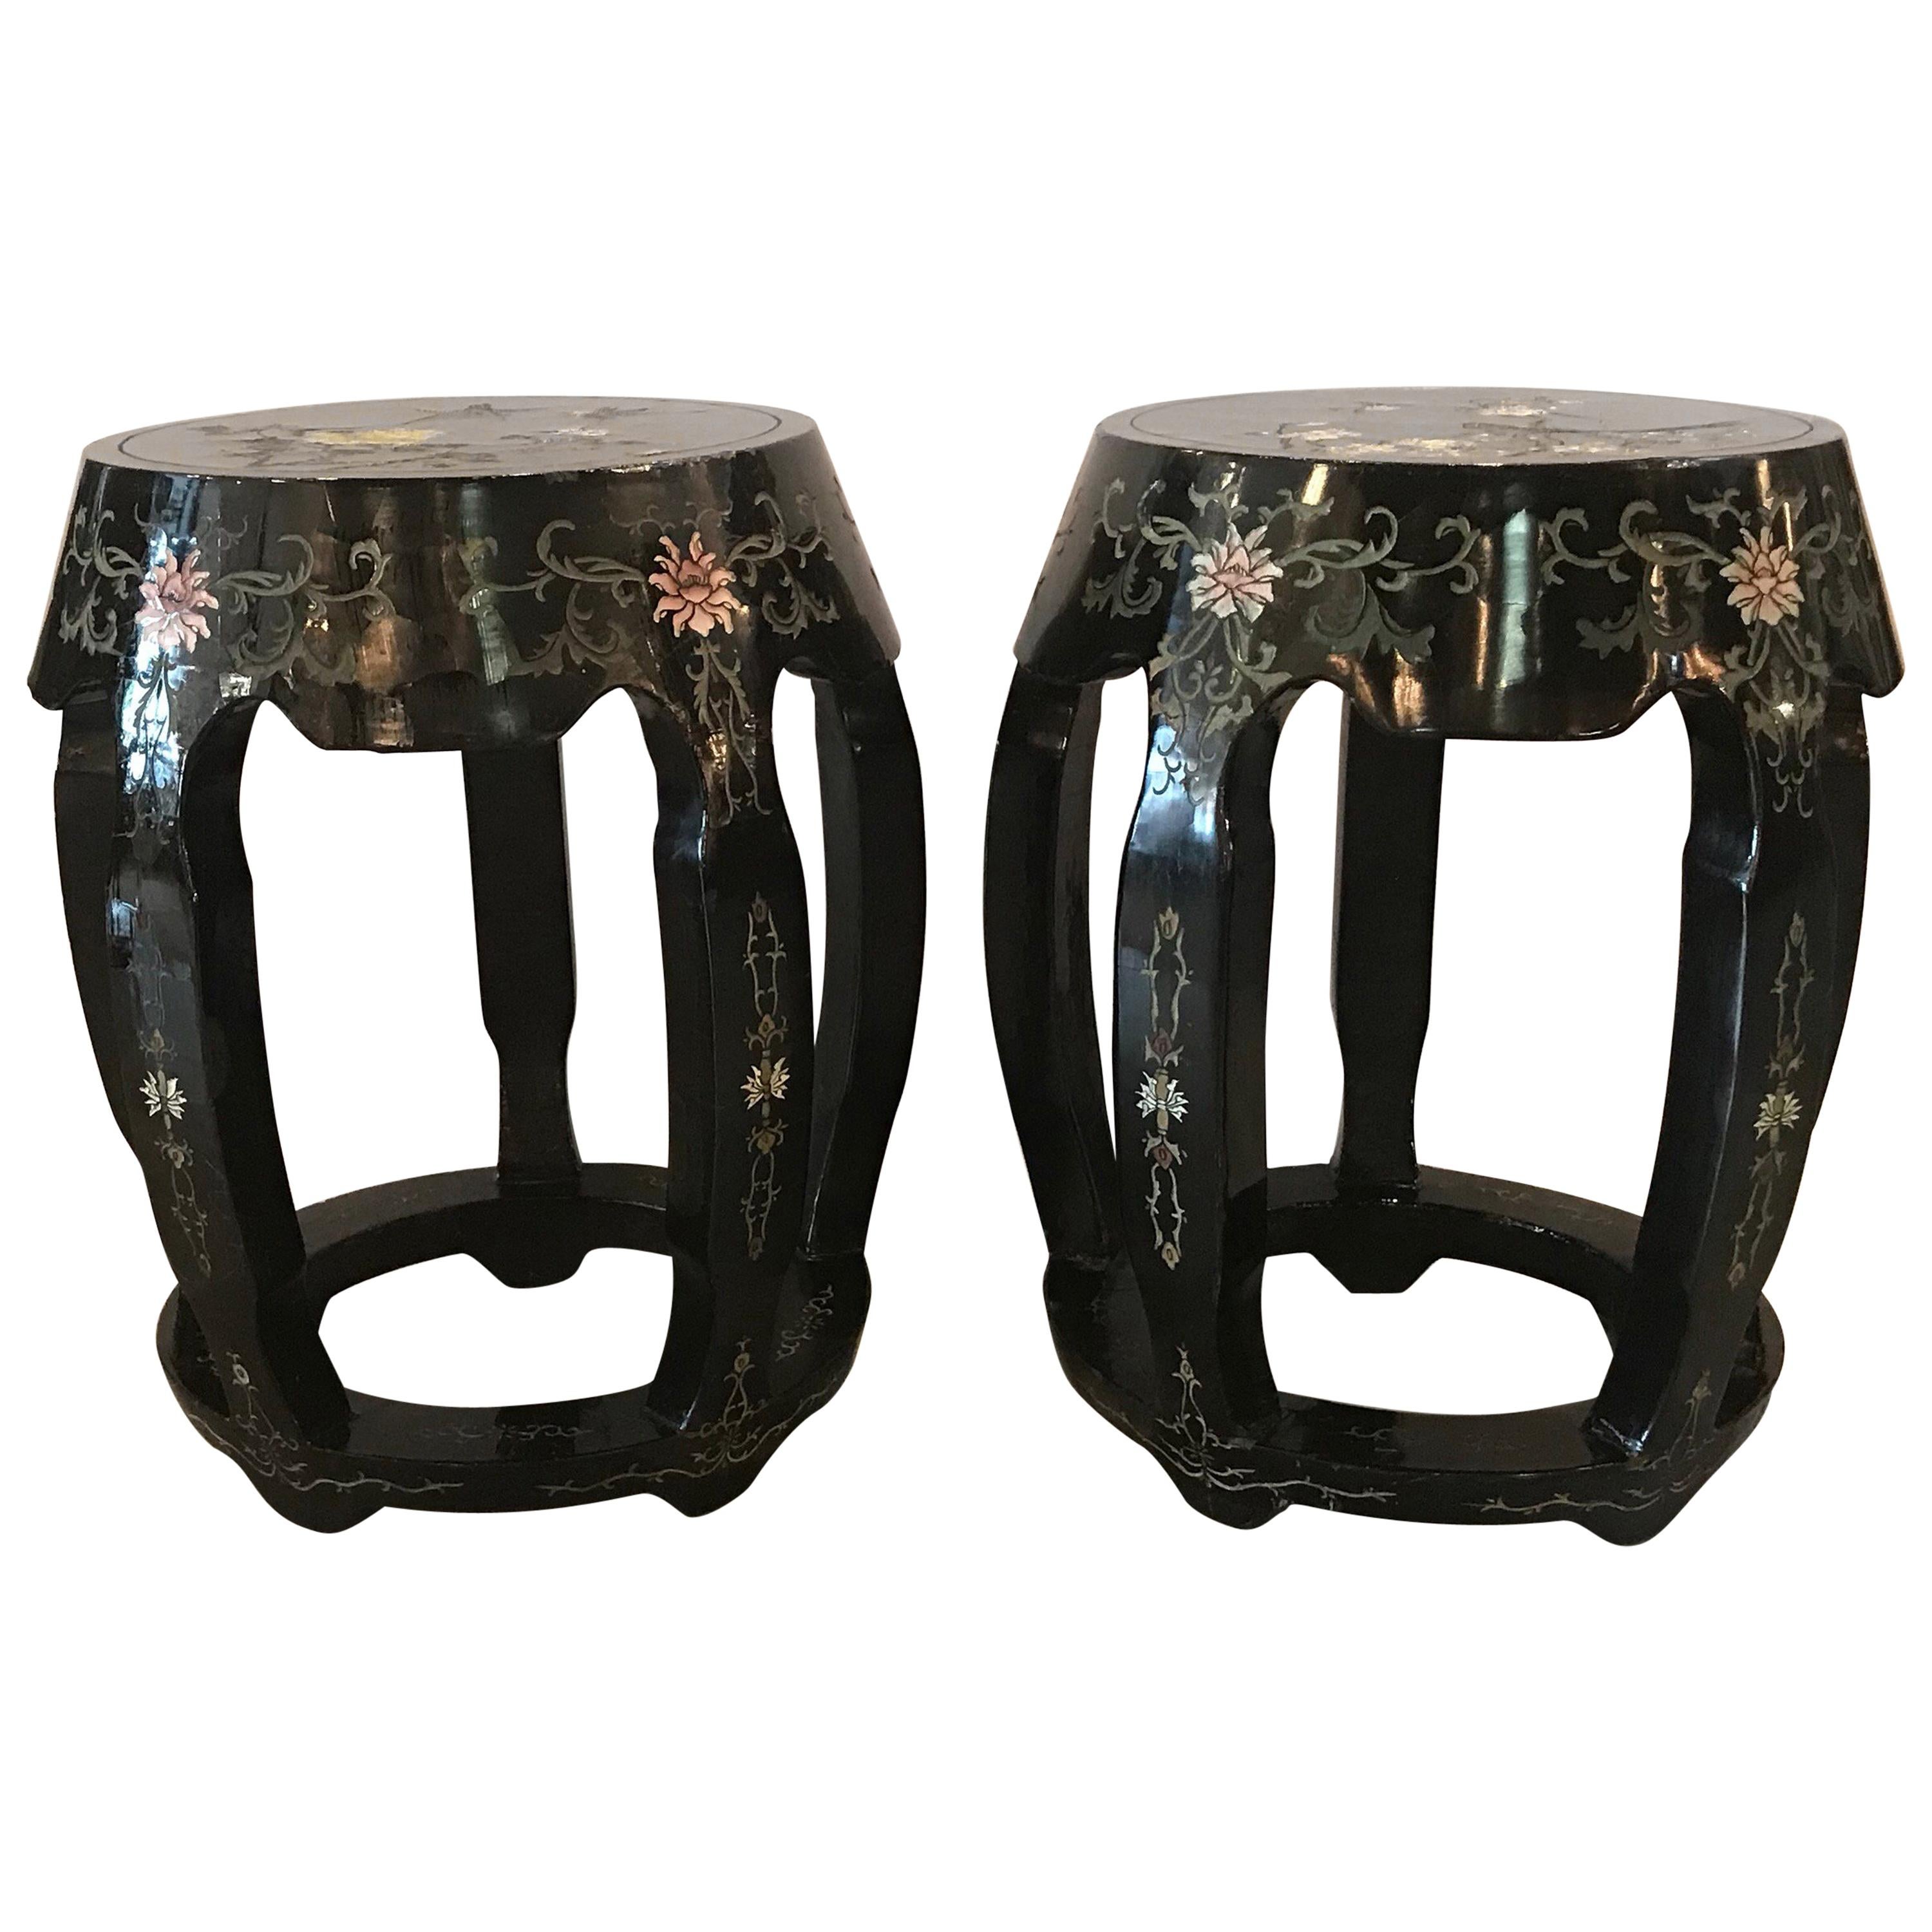 Pair of Chinese Black Lacquer Garden Seat Stands